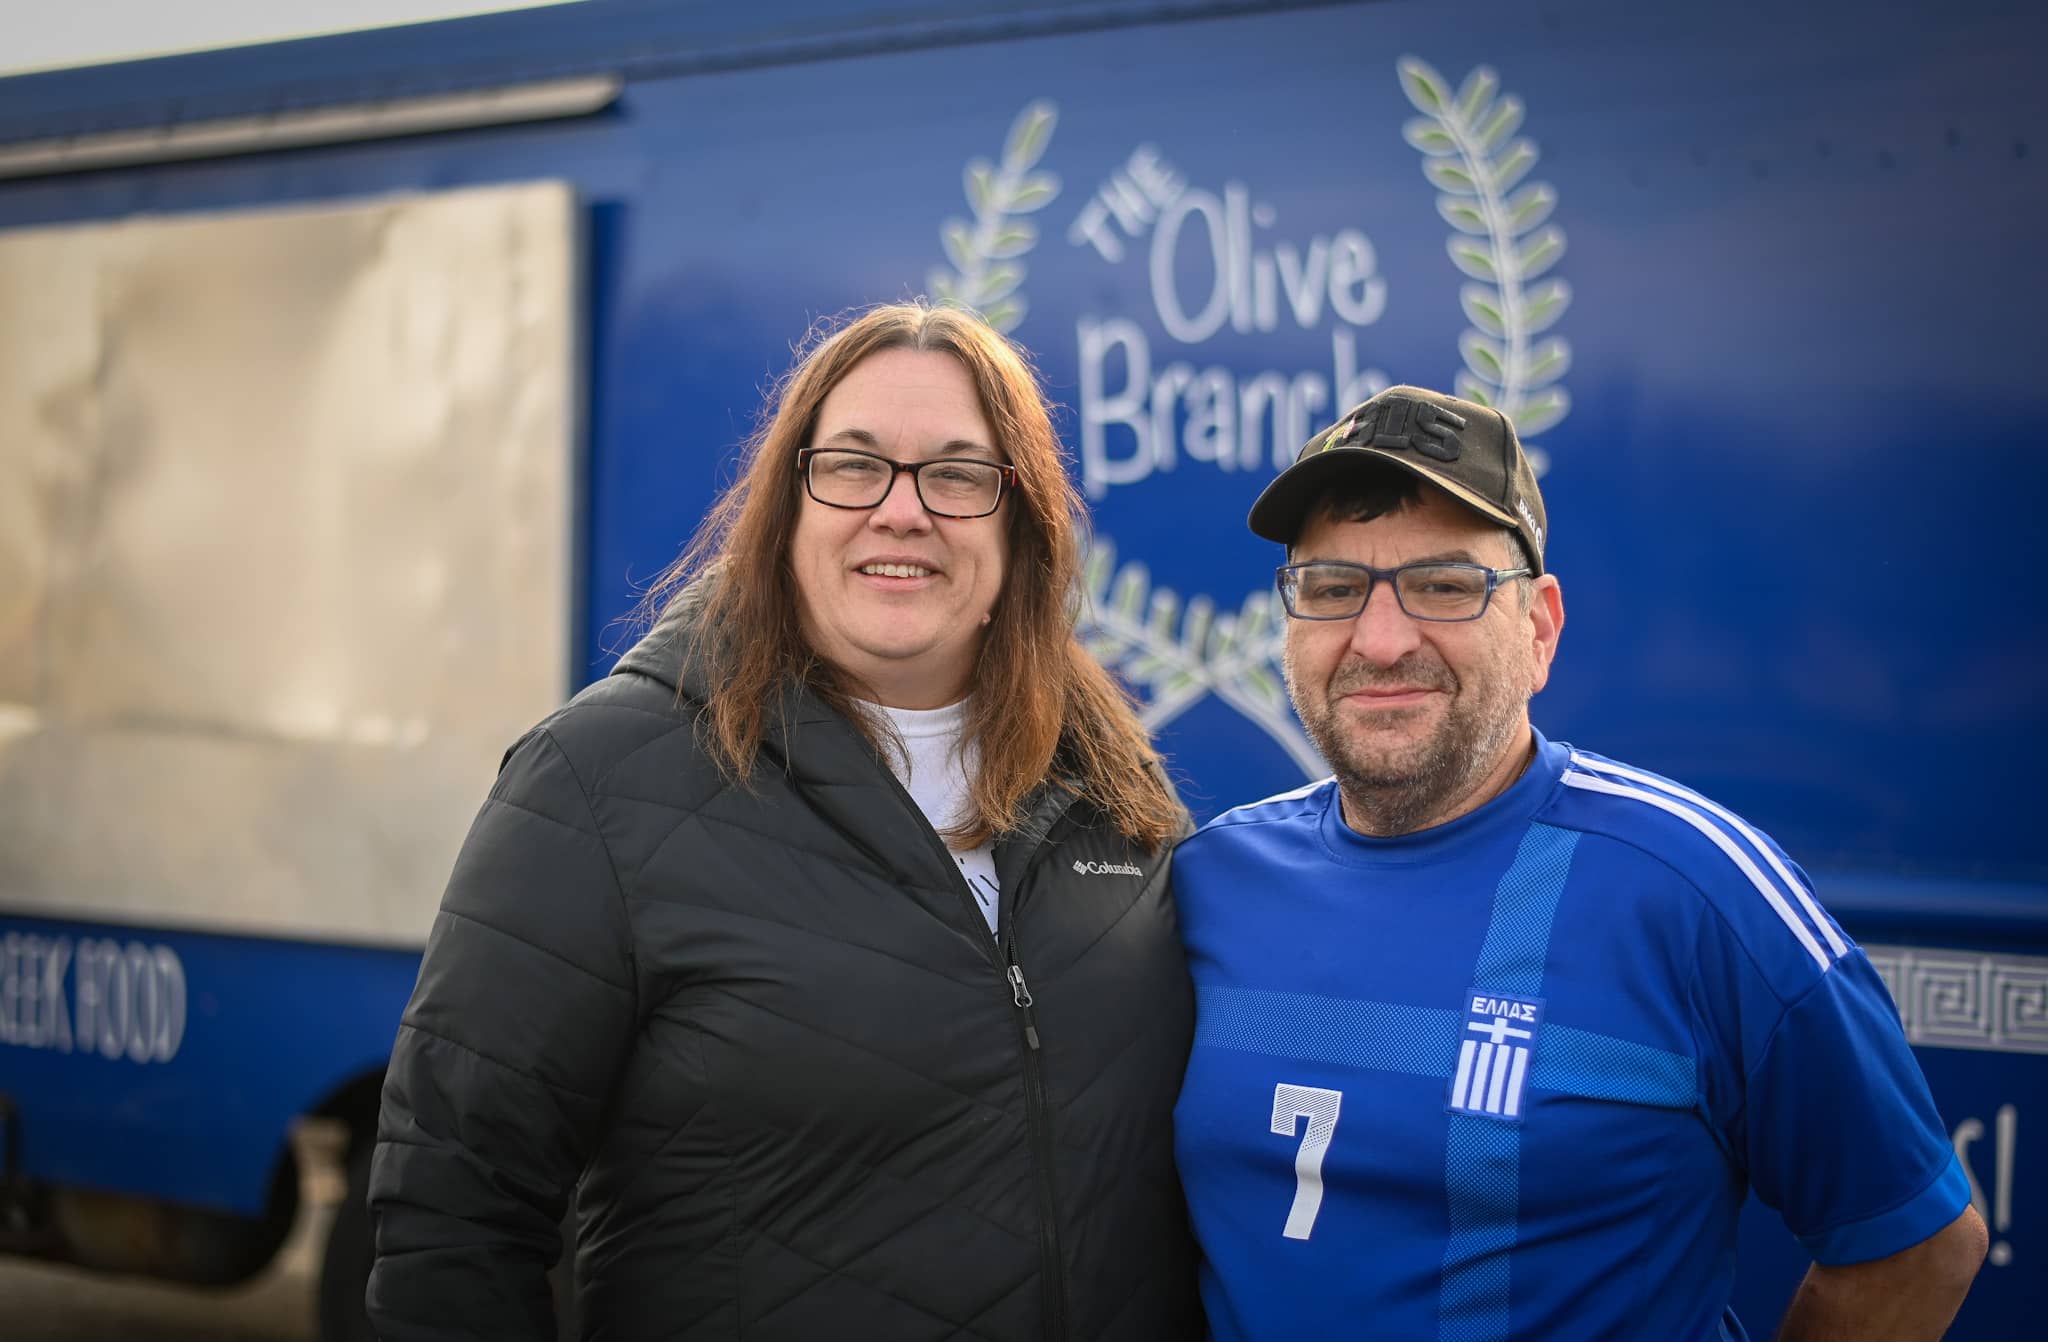 The Olive Branch Greek food truck